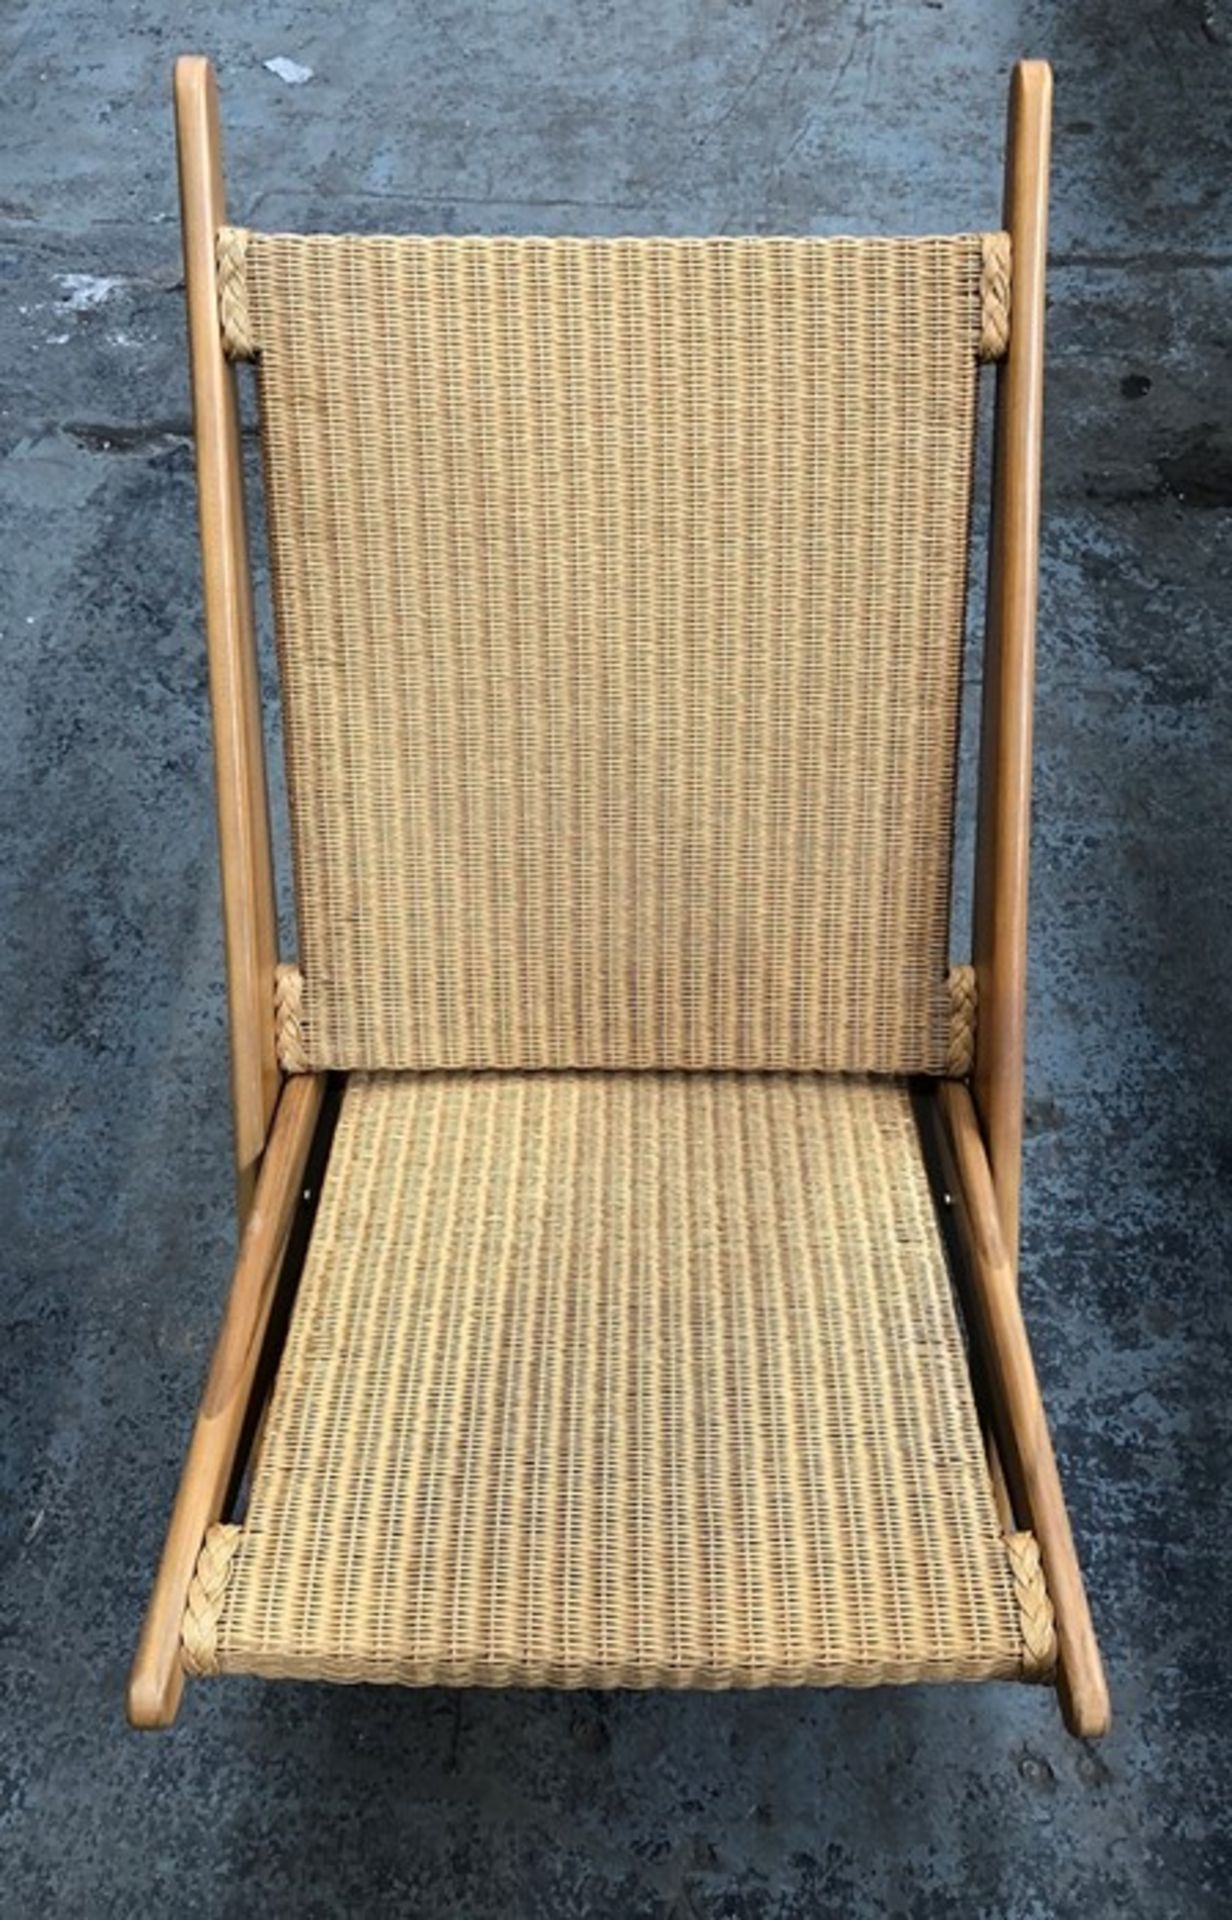 LA REDOUTE ANCELIE CANA NATURAL FOLDING ARMCHAIR - Image 2 of 3